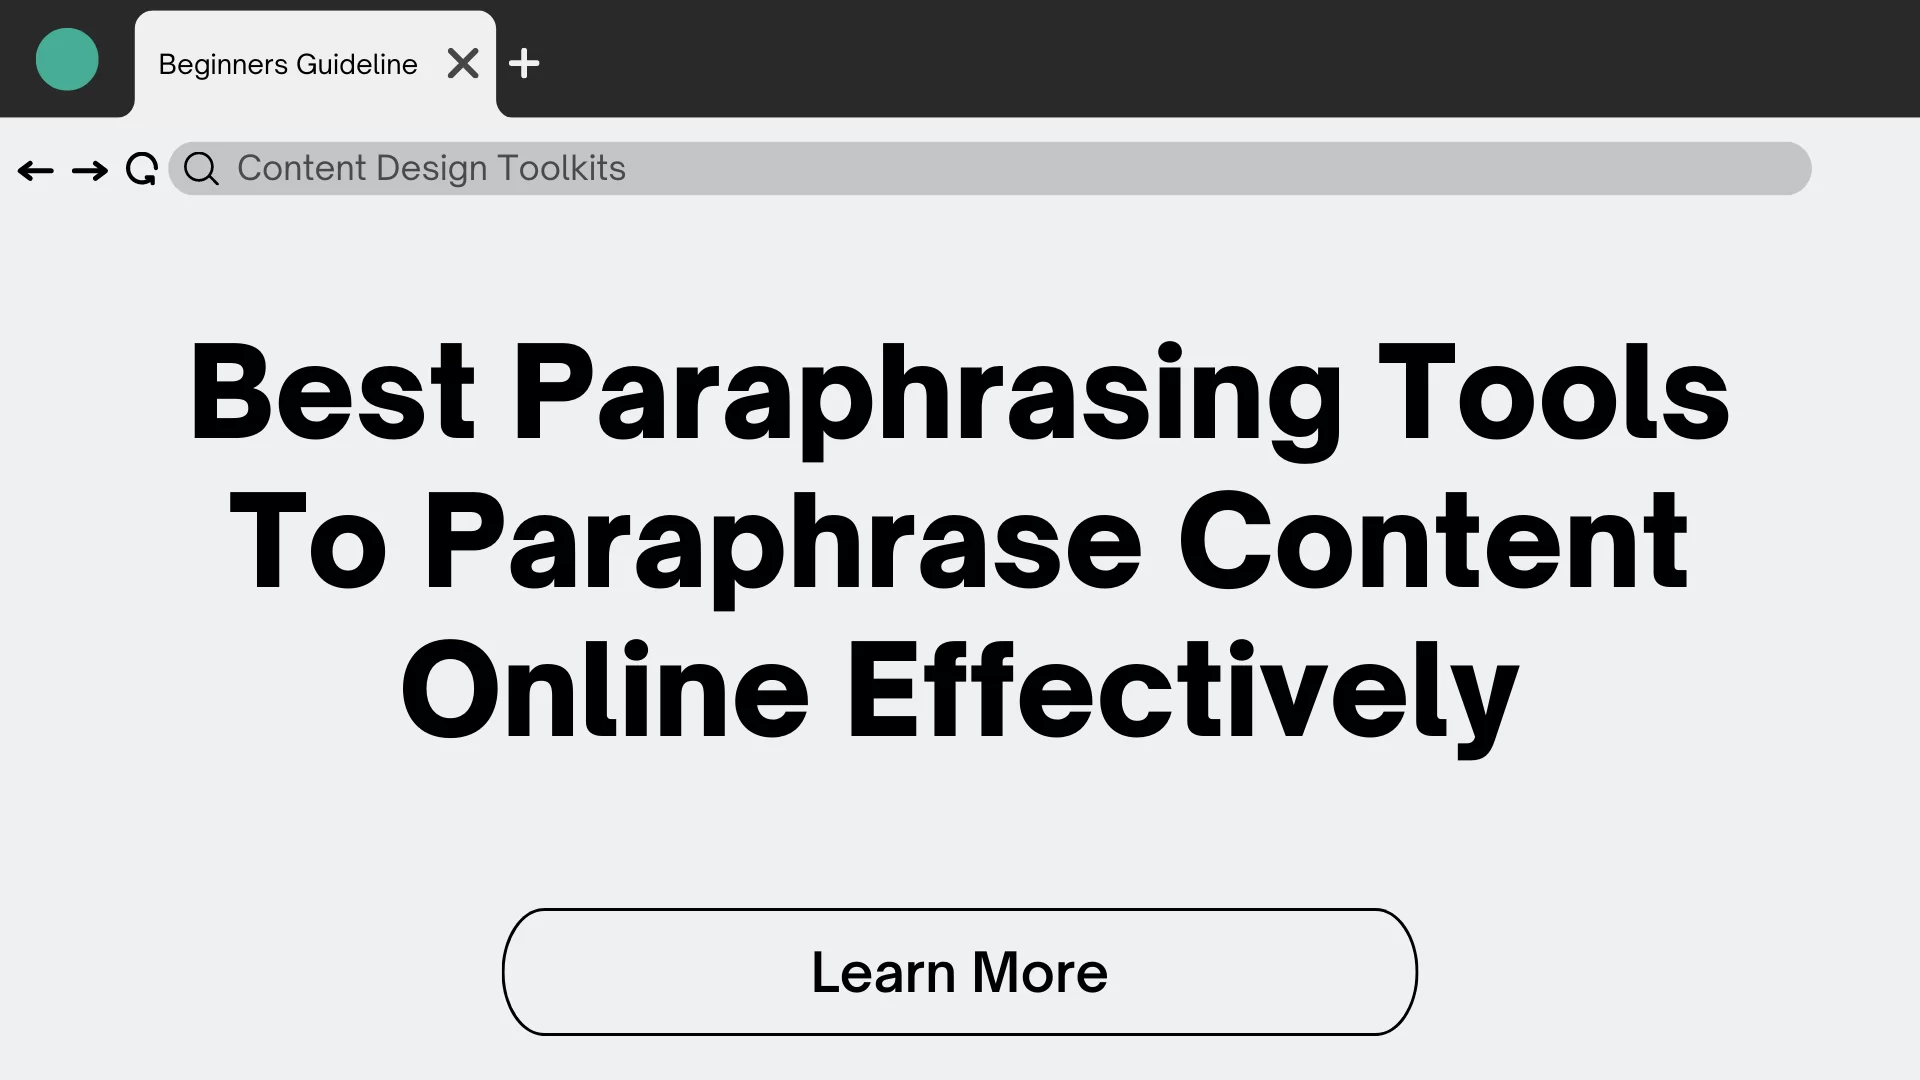 Best Paraphrasing Tools To Paraphrase Content Online Effectively